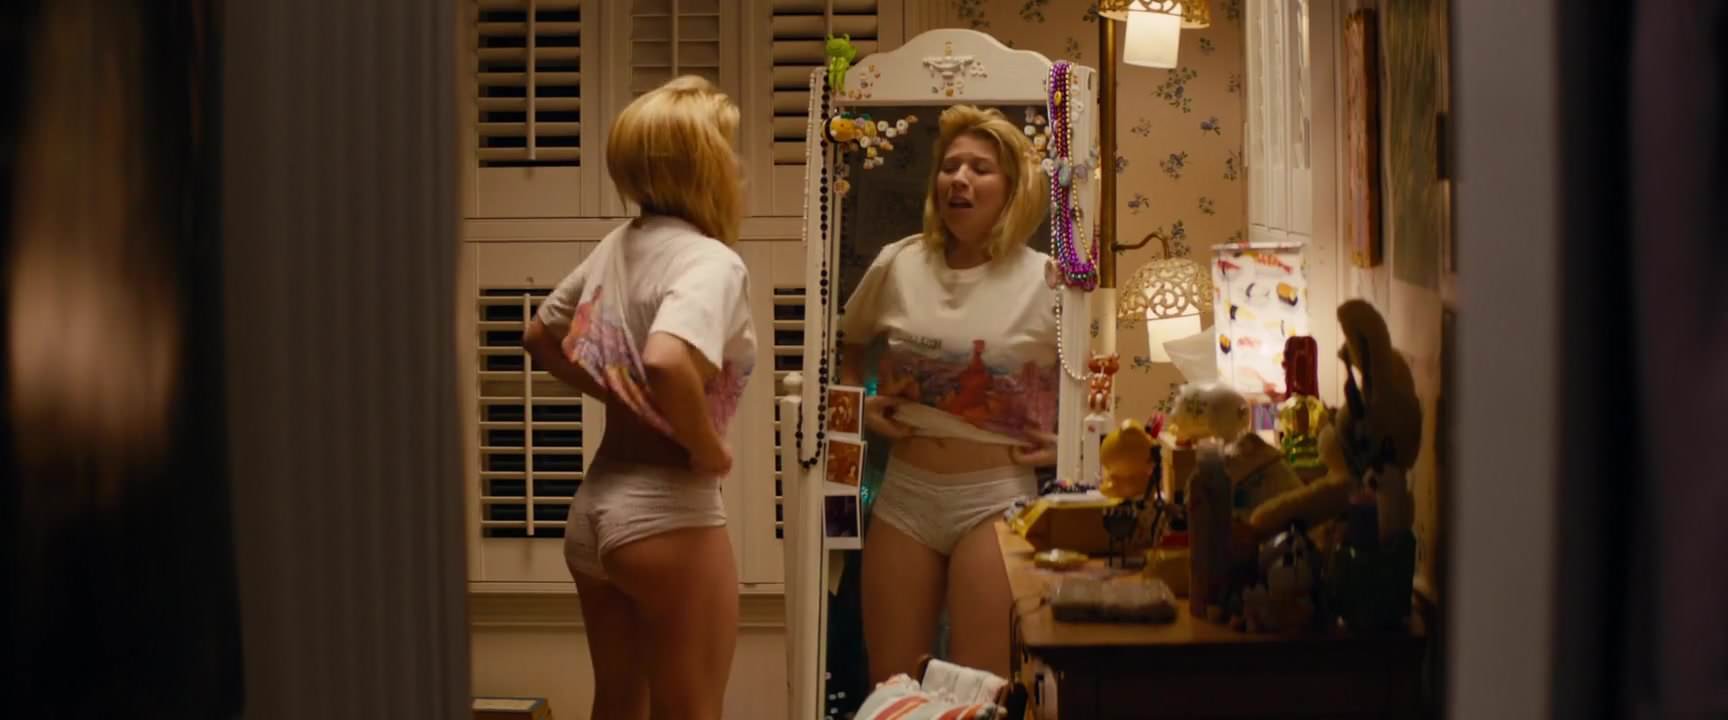 best of Mccurdy bitches jennette 